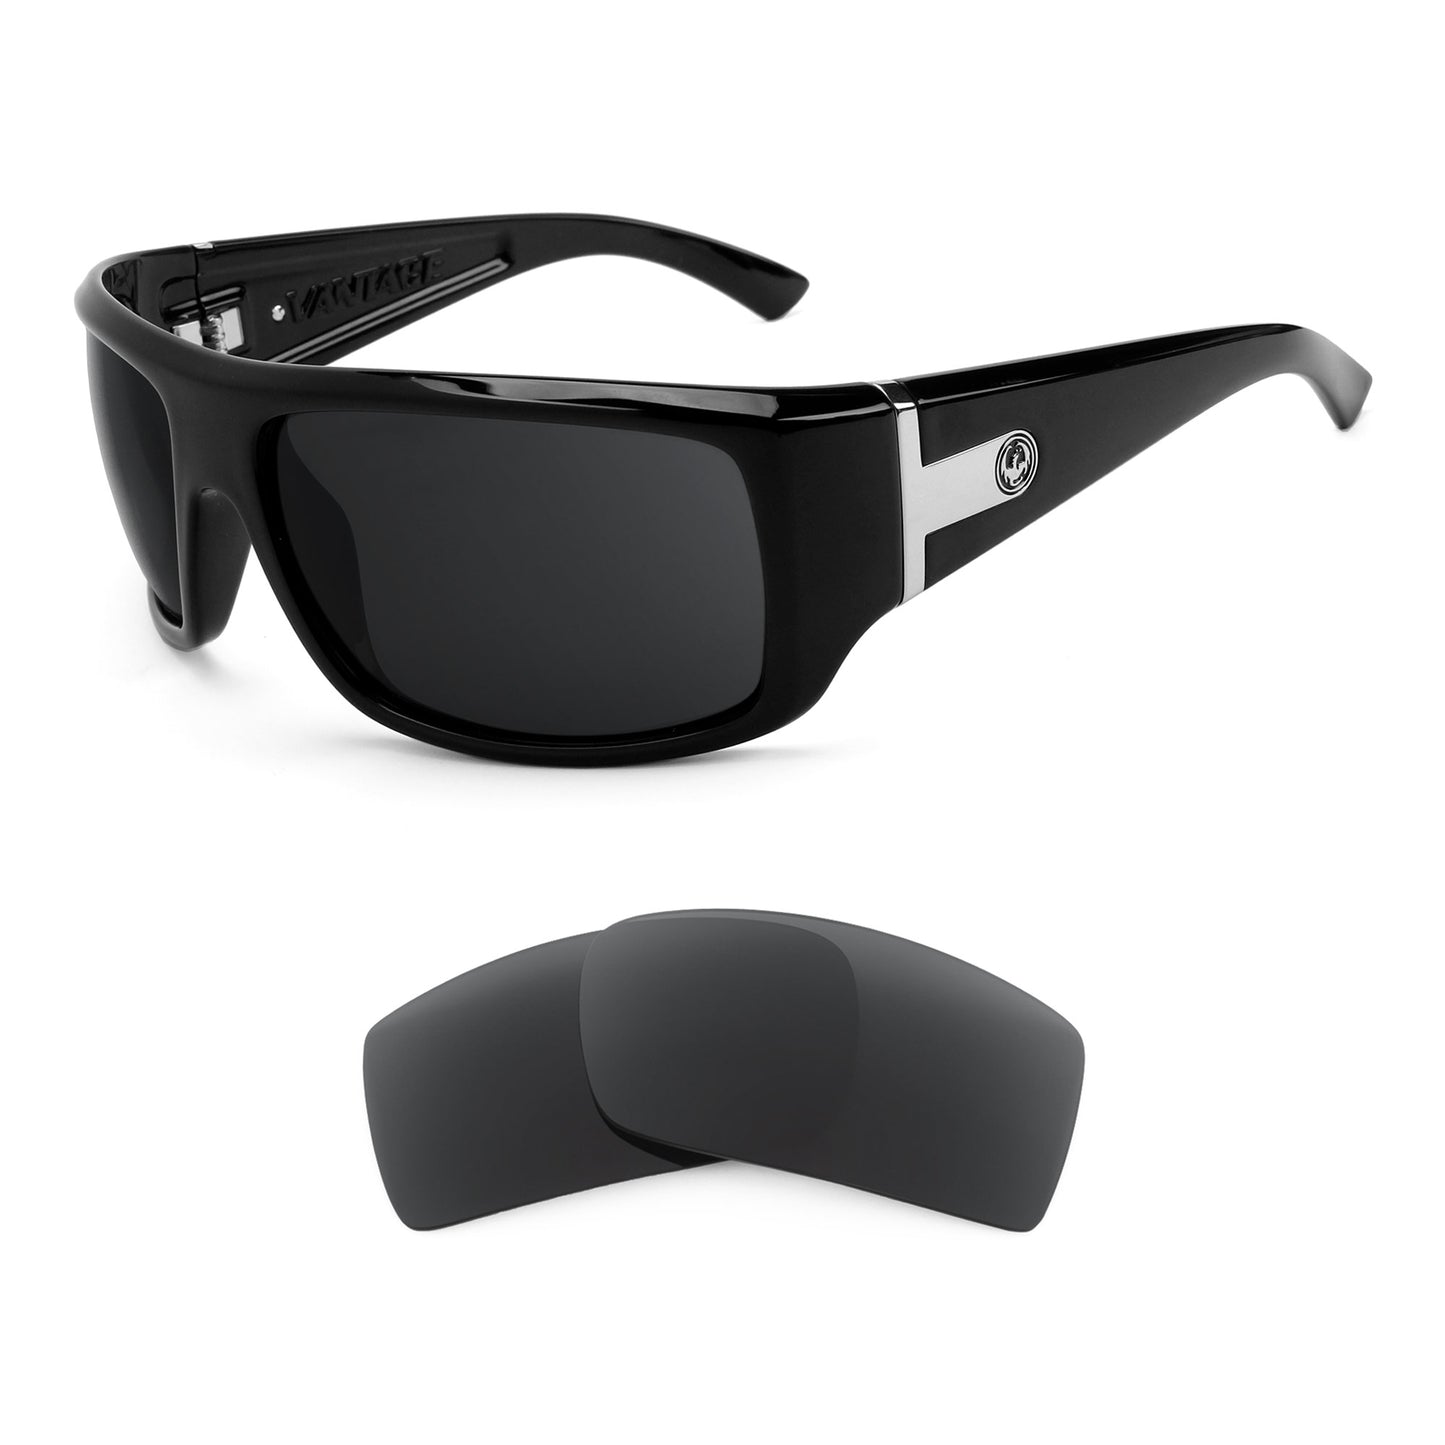 Dragon Vantage H2O sunglasses with replacement lenses